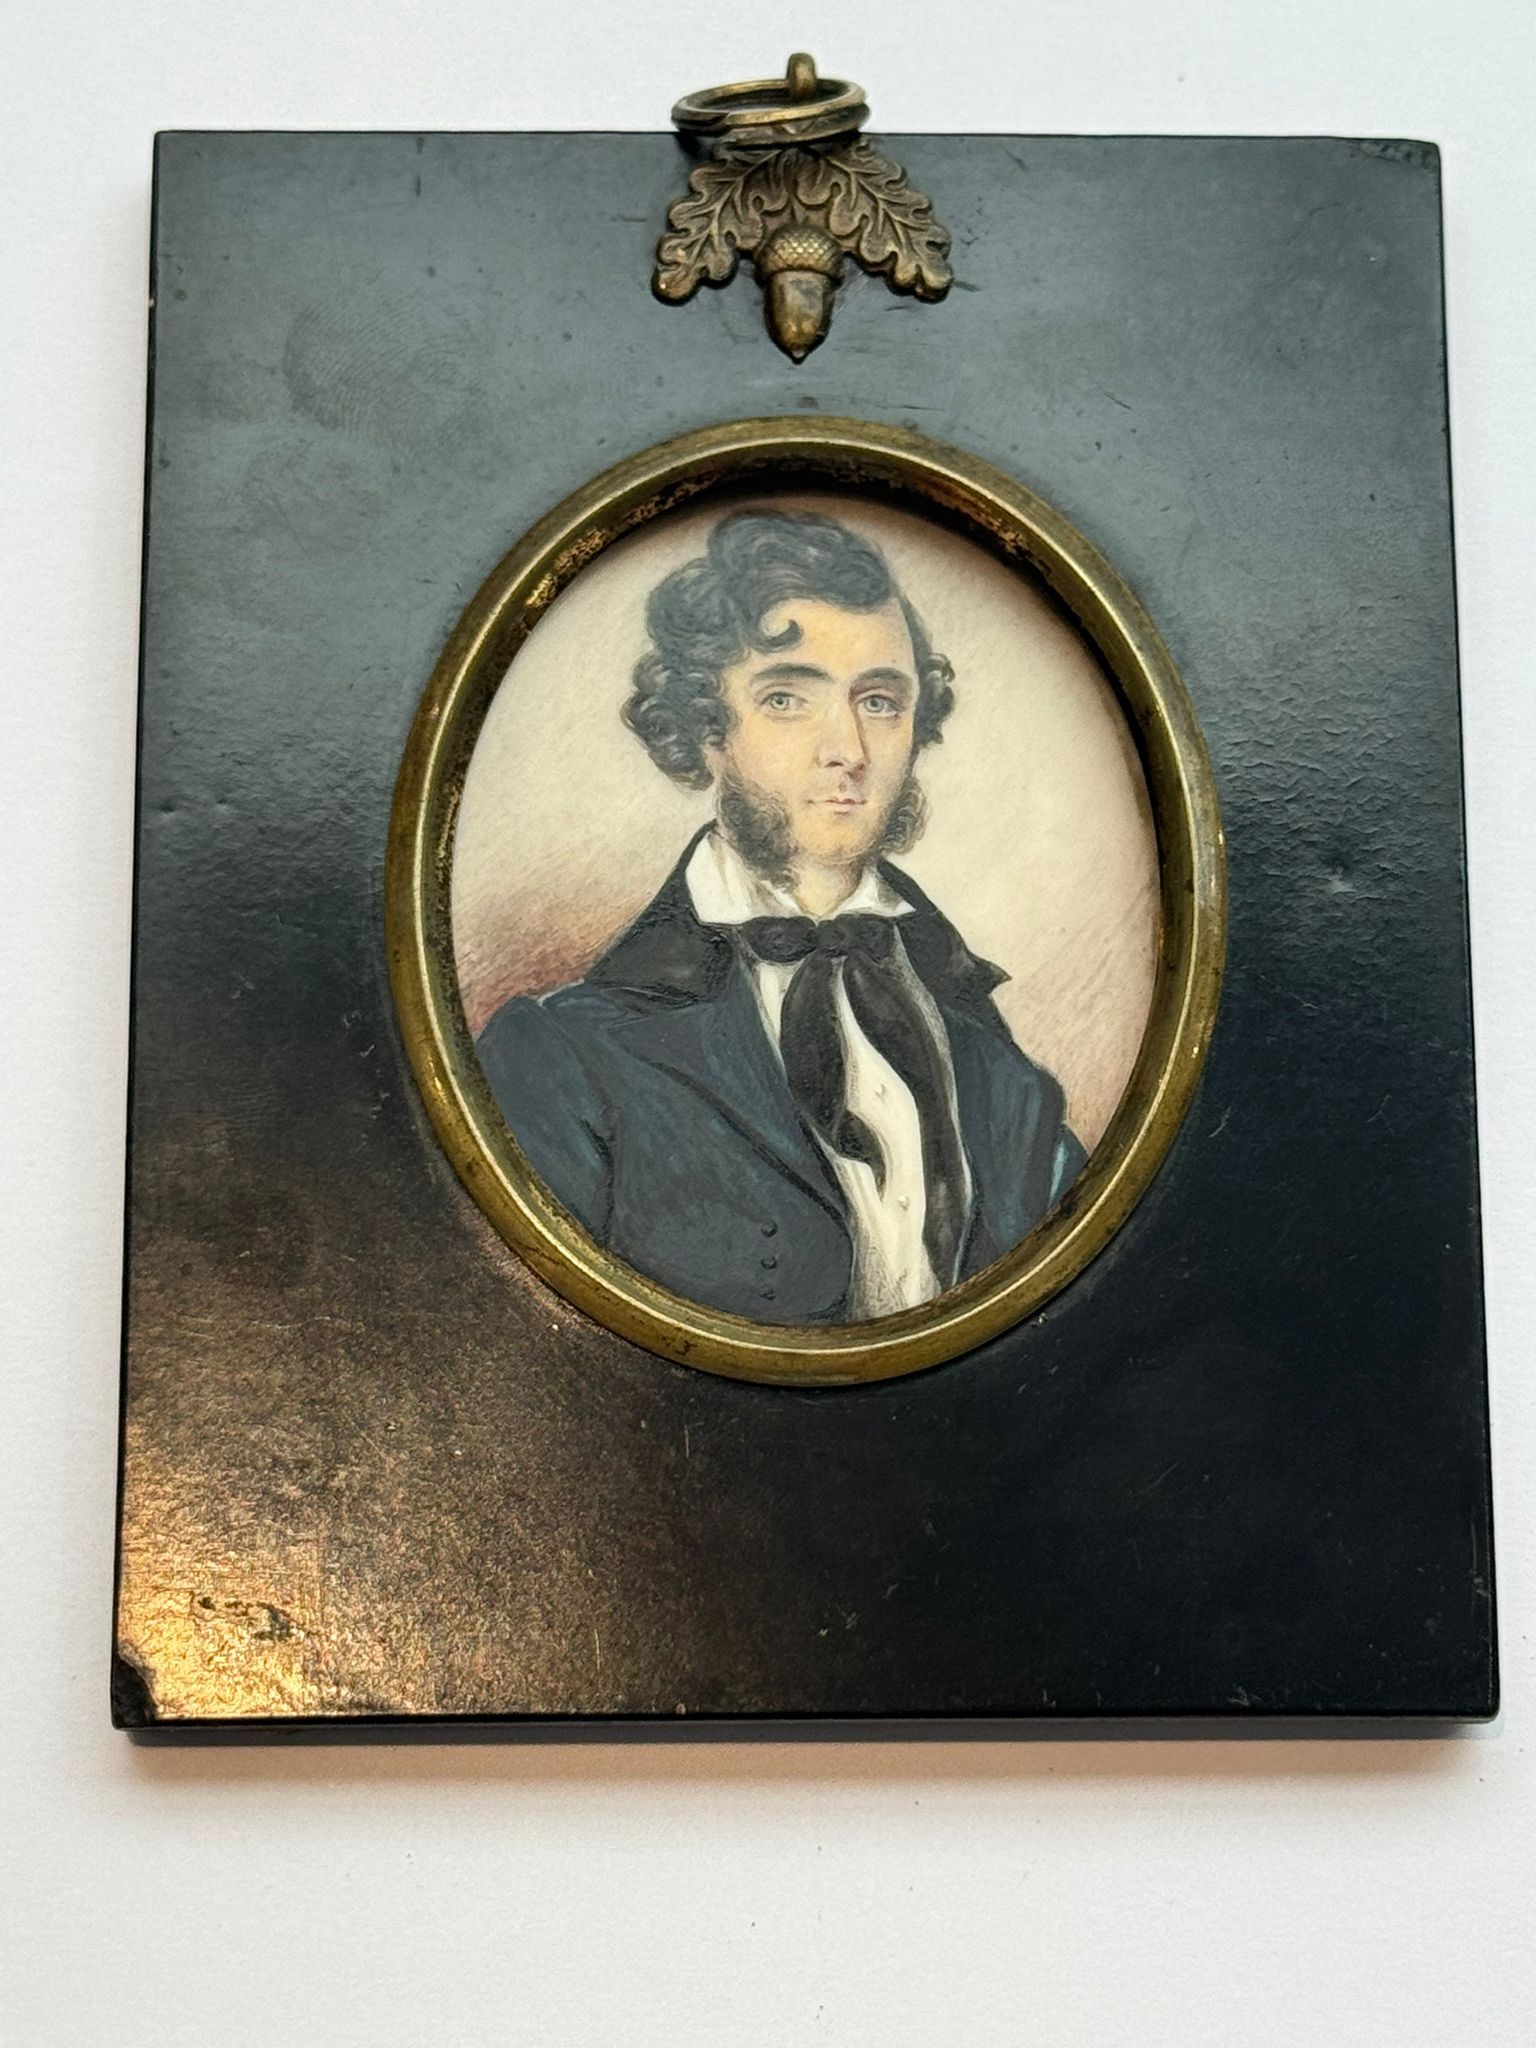 A 19th century oval portrait miniature of a young naval officer, with thick black wavy hair and ‘